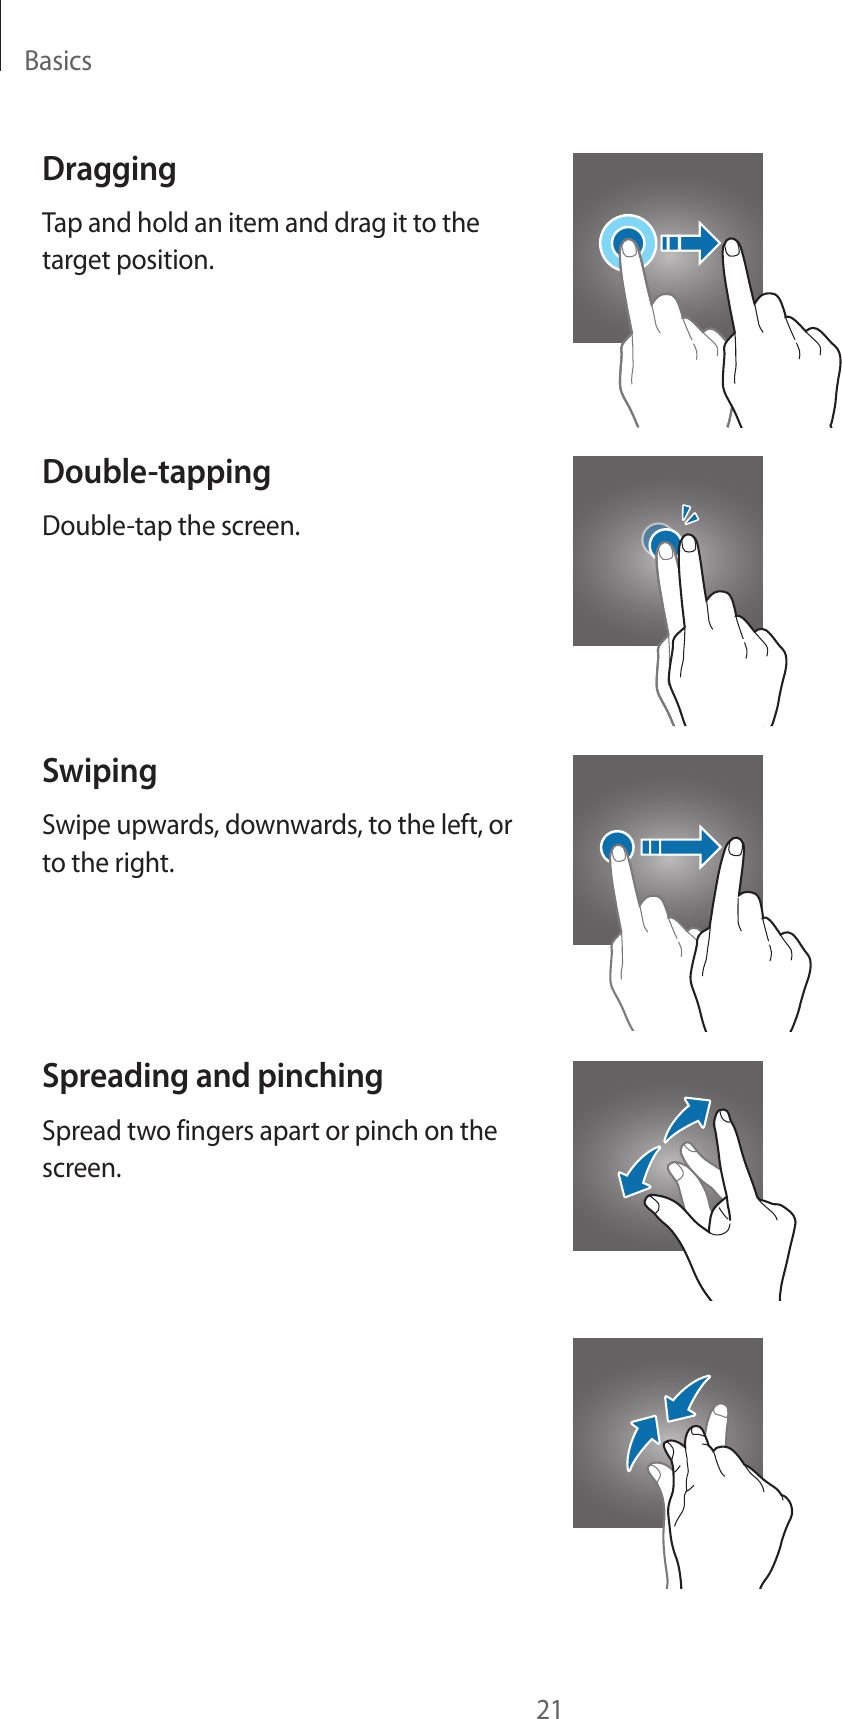 Basics21DraggingTap and hold an item and drag it to the target position.Double-tappingDouble-tap the screen.SwipingSwipe upwards, downwards, to the left, or to the right.Spreading and pinchingSpread two fingers apart or pinch on the screen.